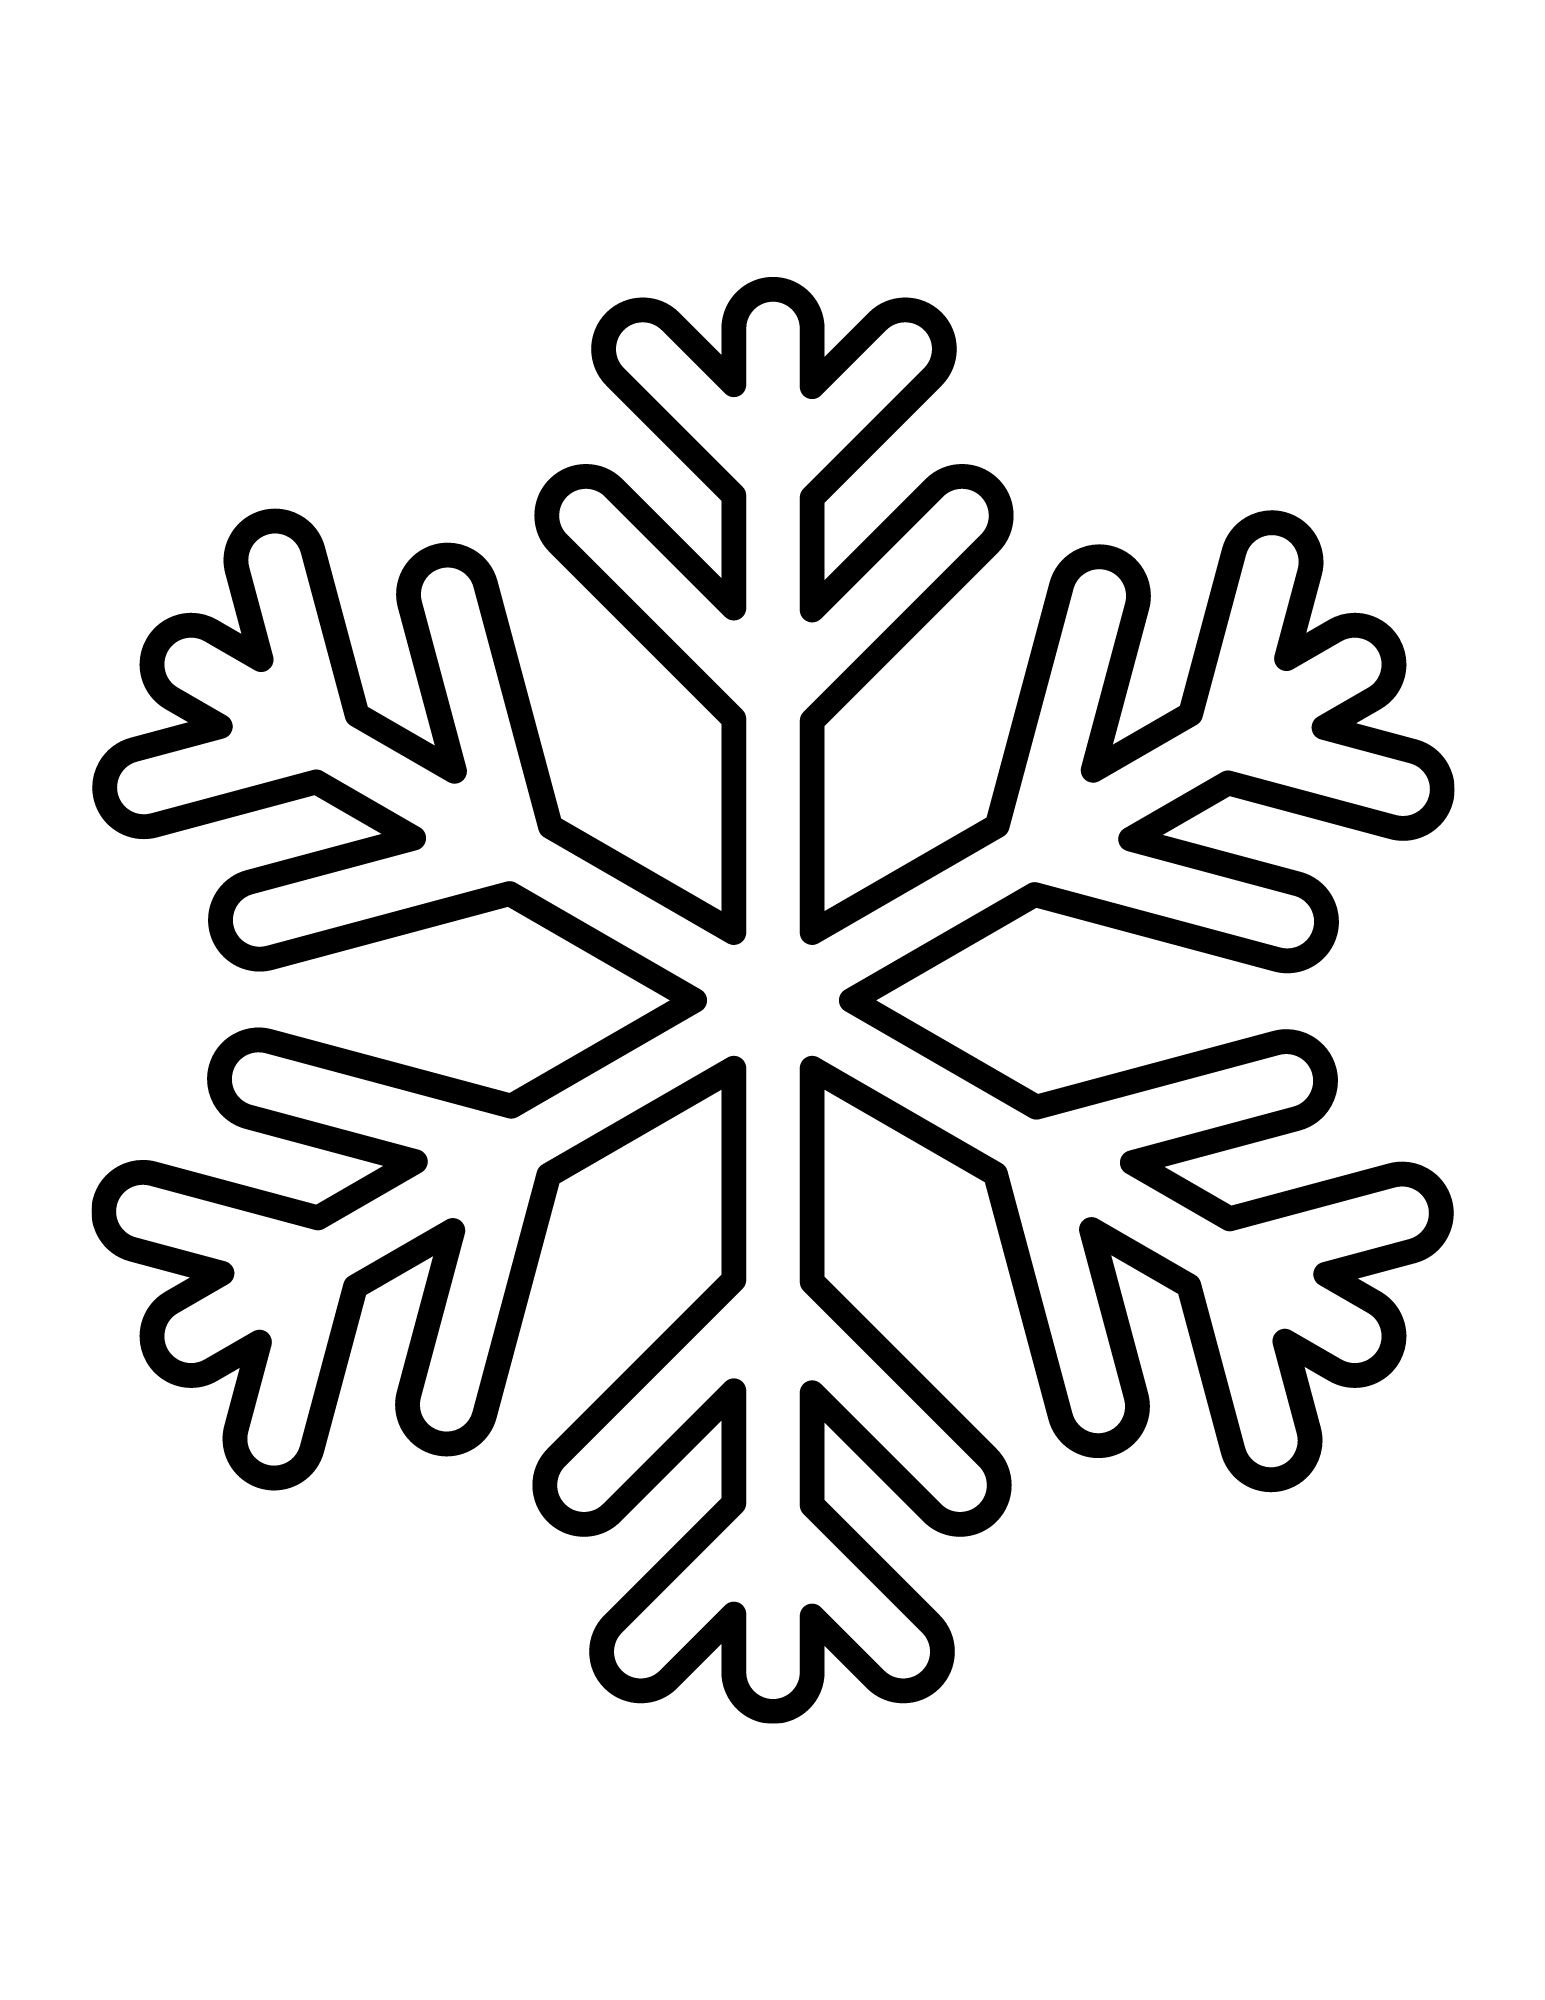 FREE Printable Snowflake Patterns Large And Small Snowflakes 